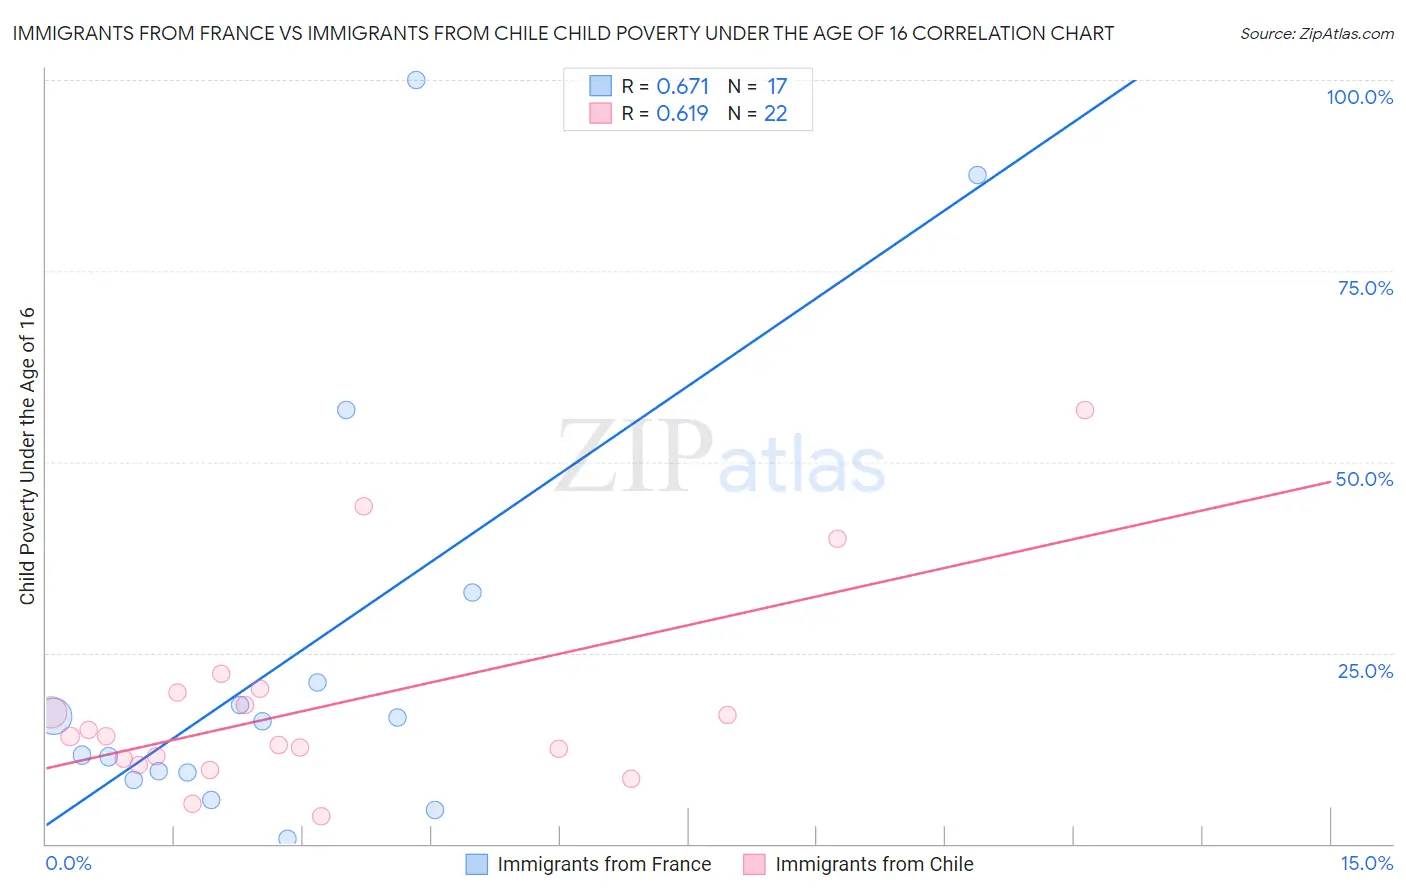 Immigrants from France vs Immigrants from Chile Child Poverty Under the Age of 16